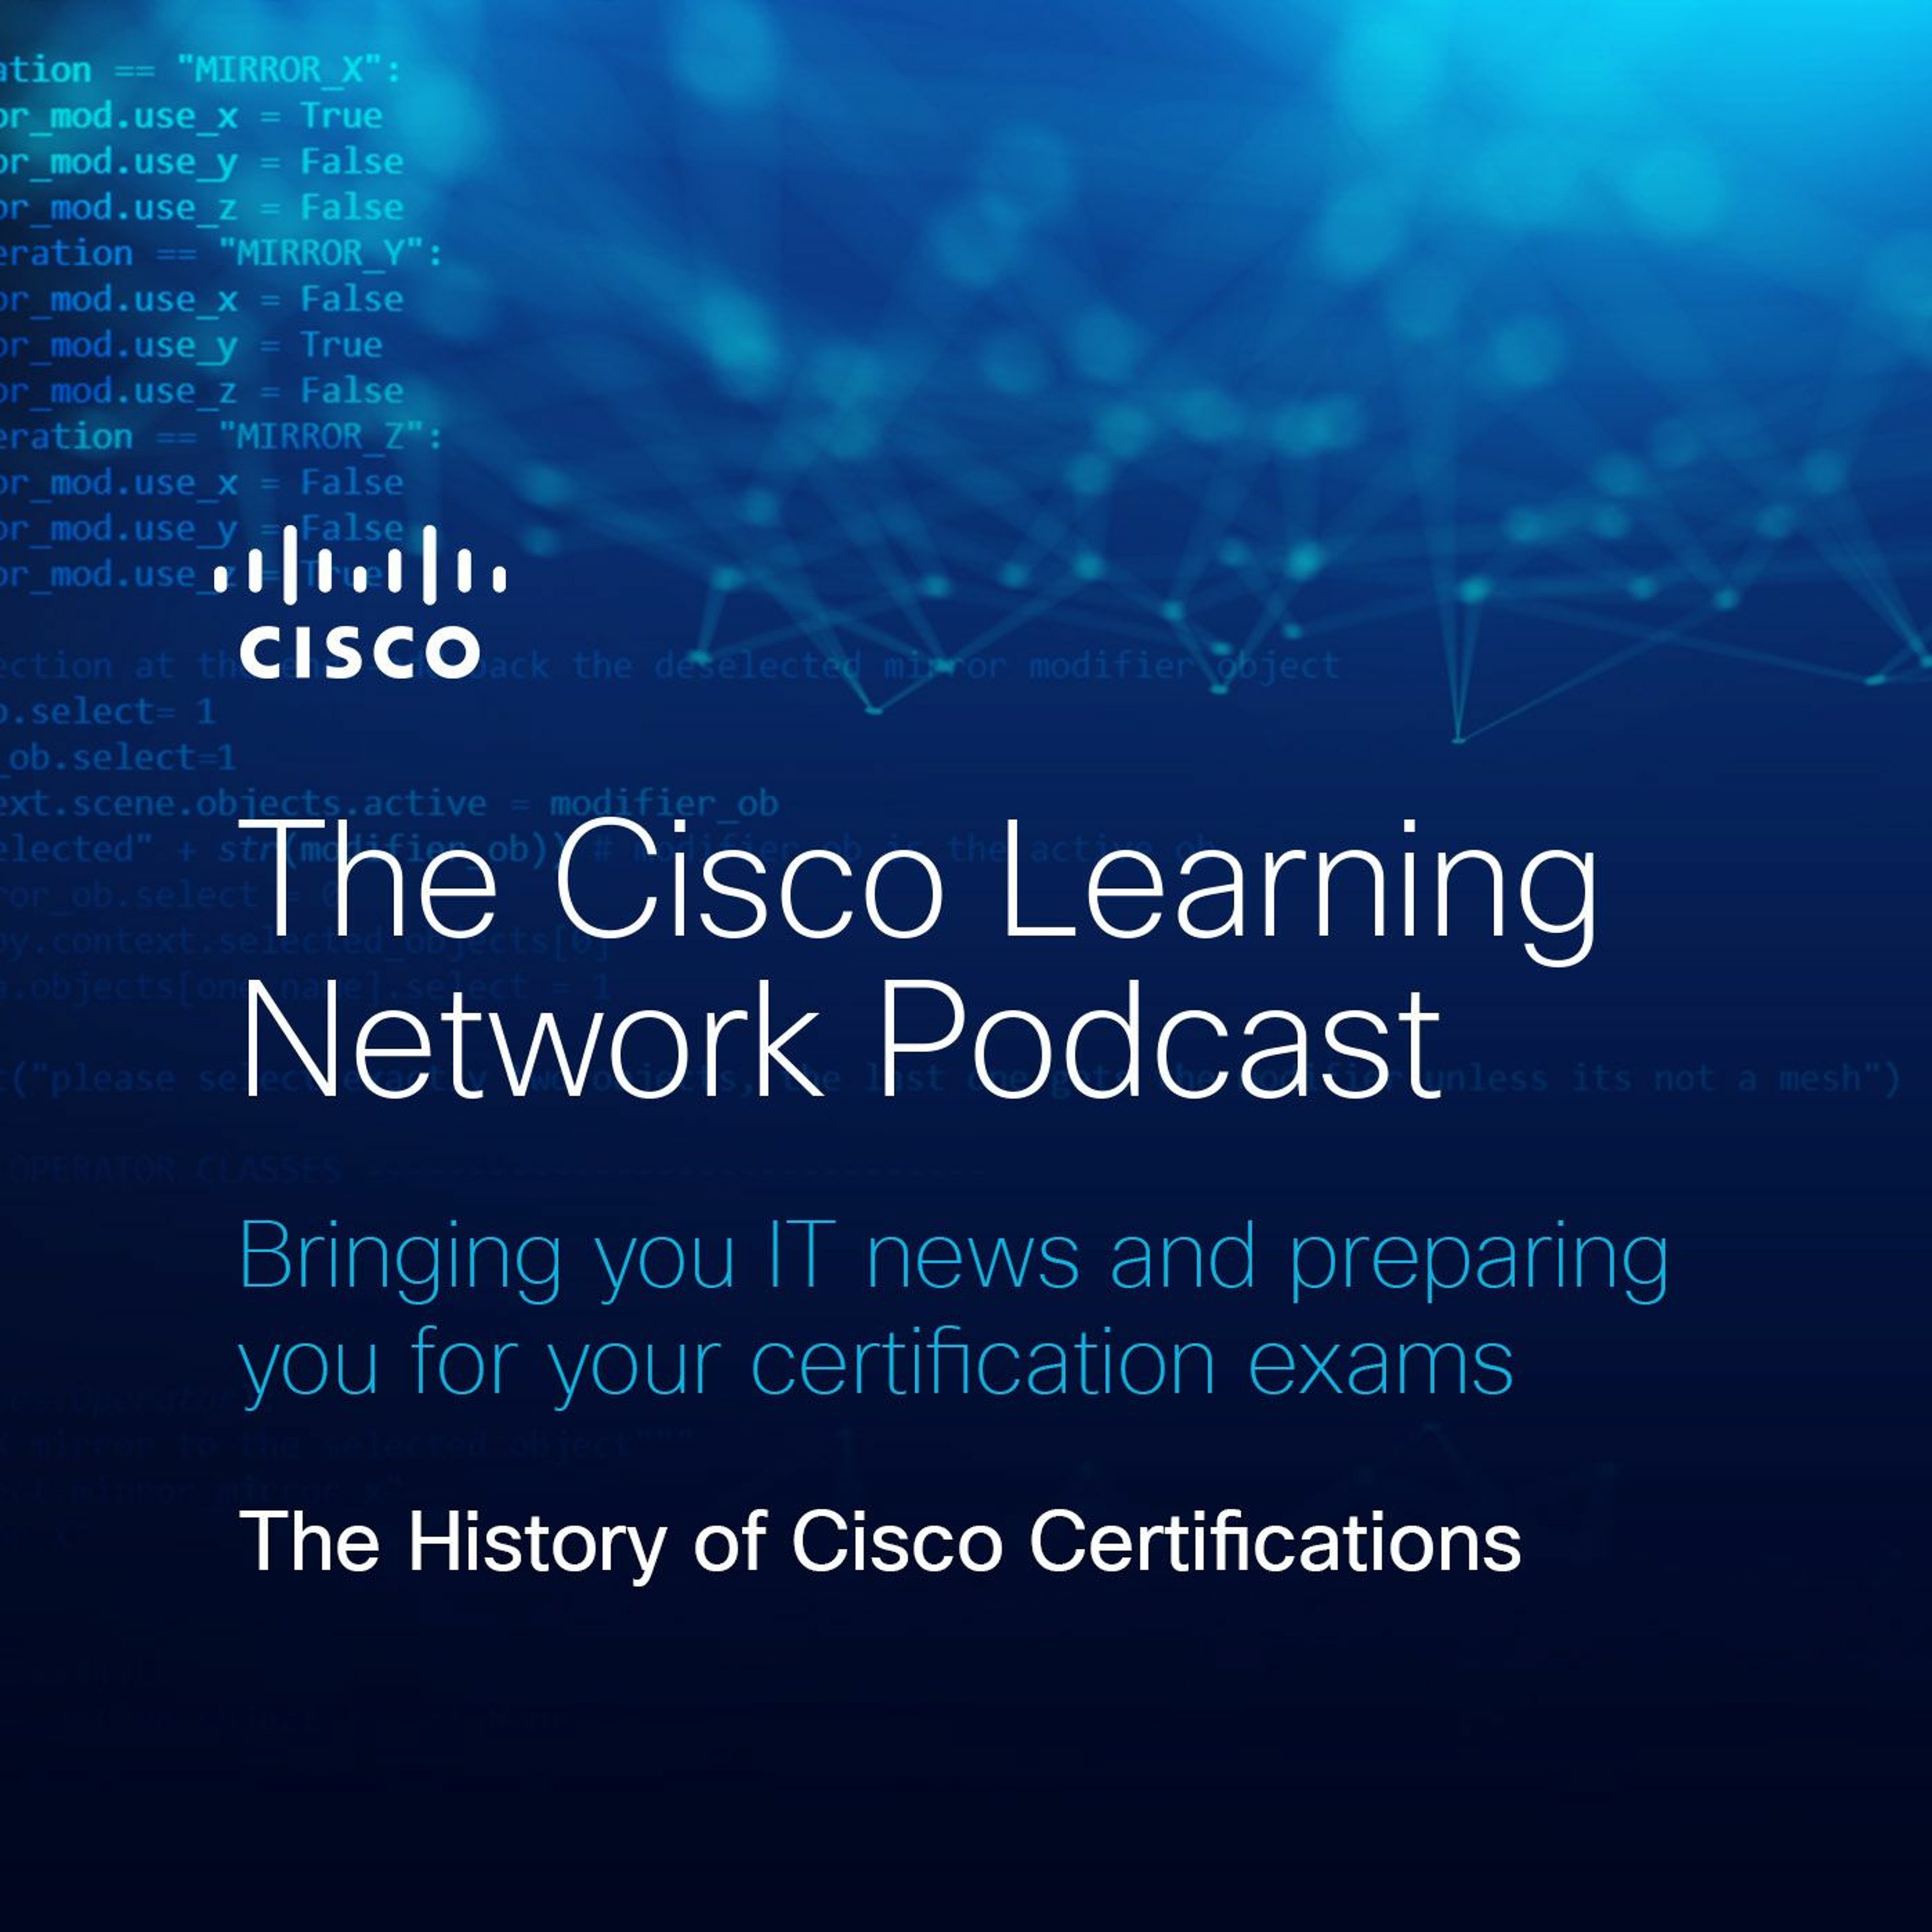 The History of Cisco Certifications